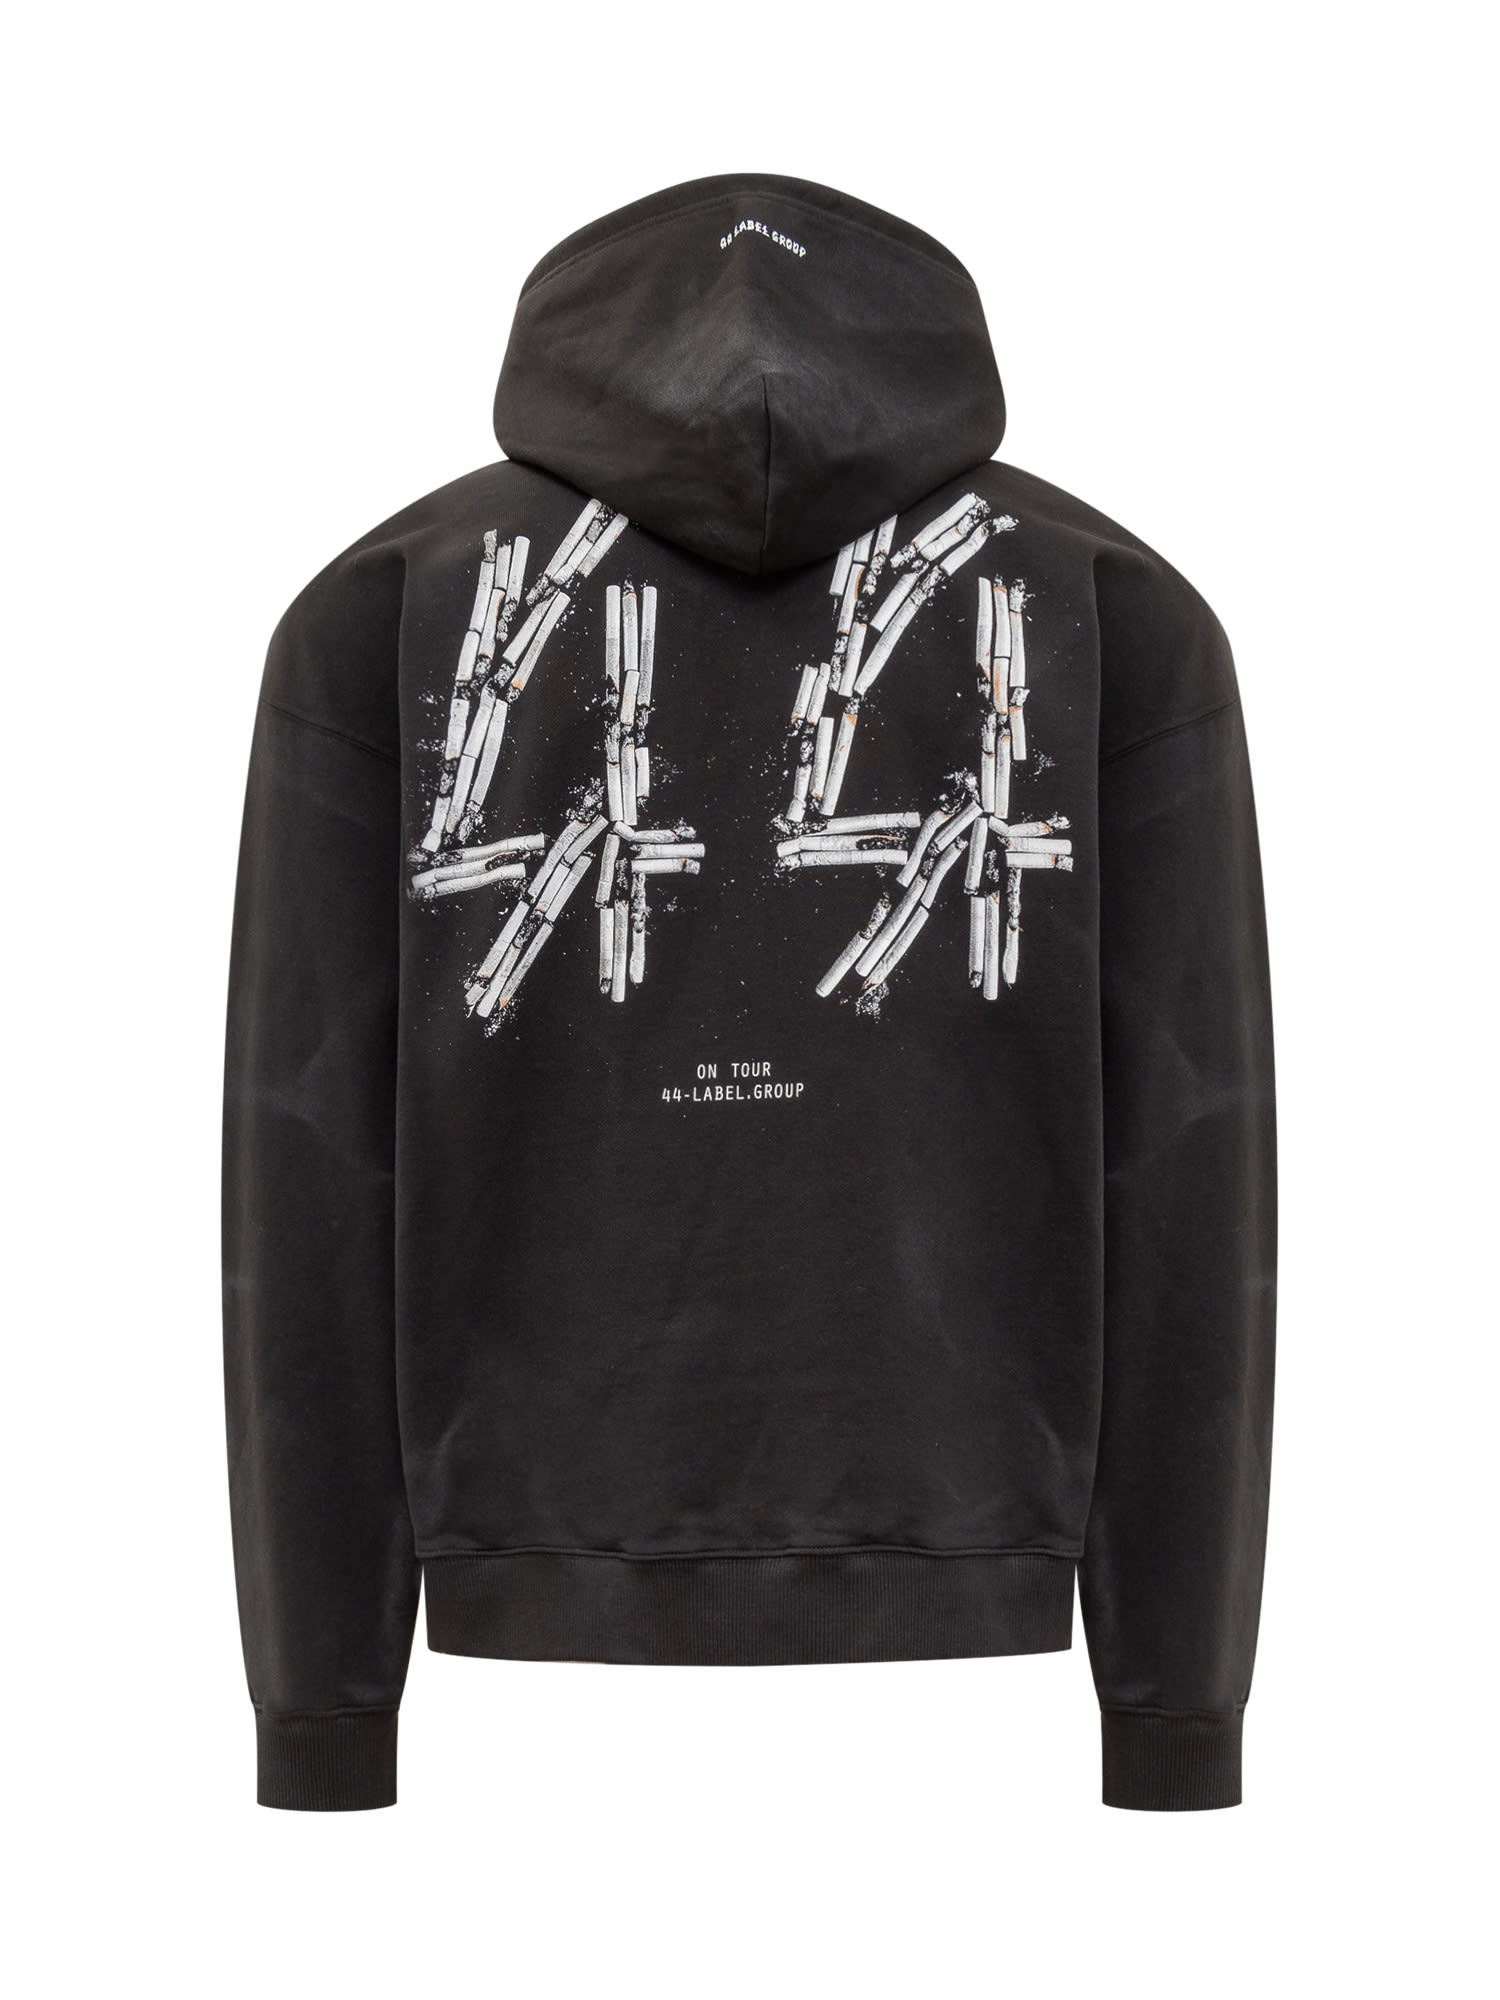 Shop 44 Label Group New Classic Hoodie In Black-44 Smoke Print